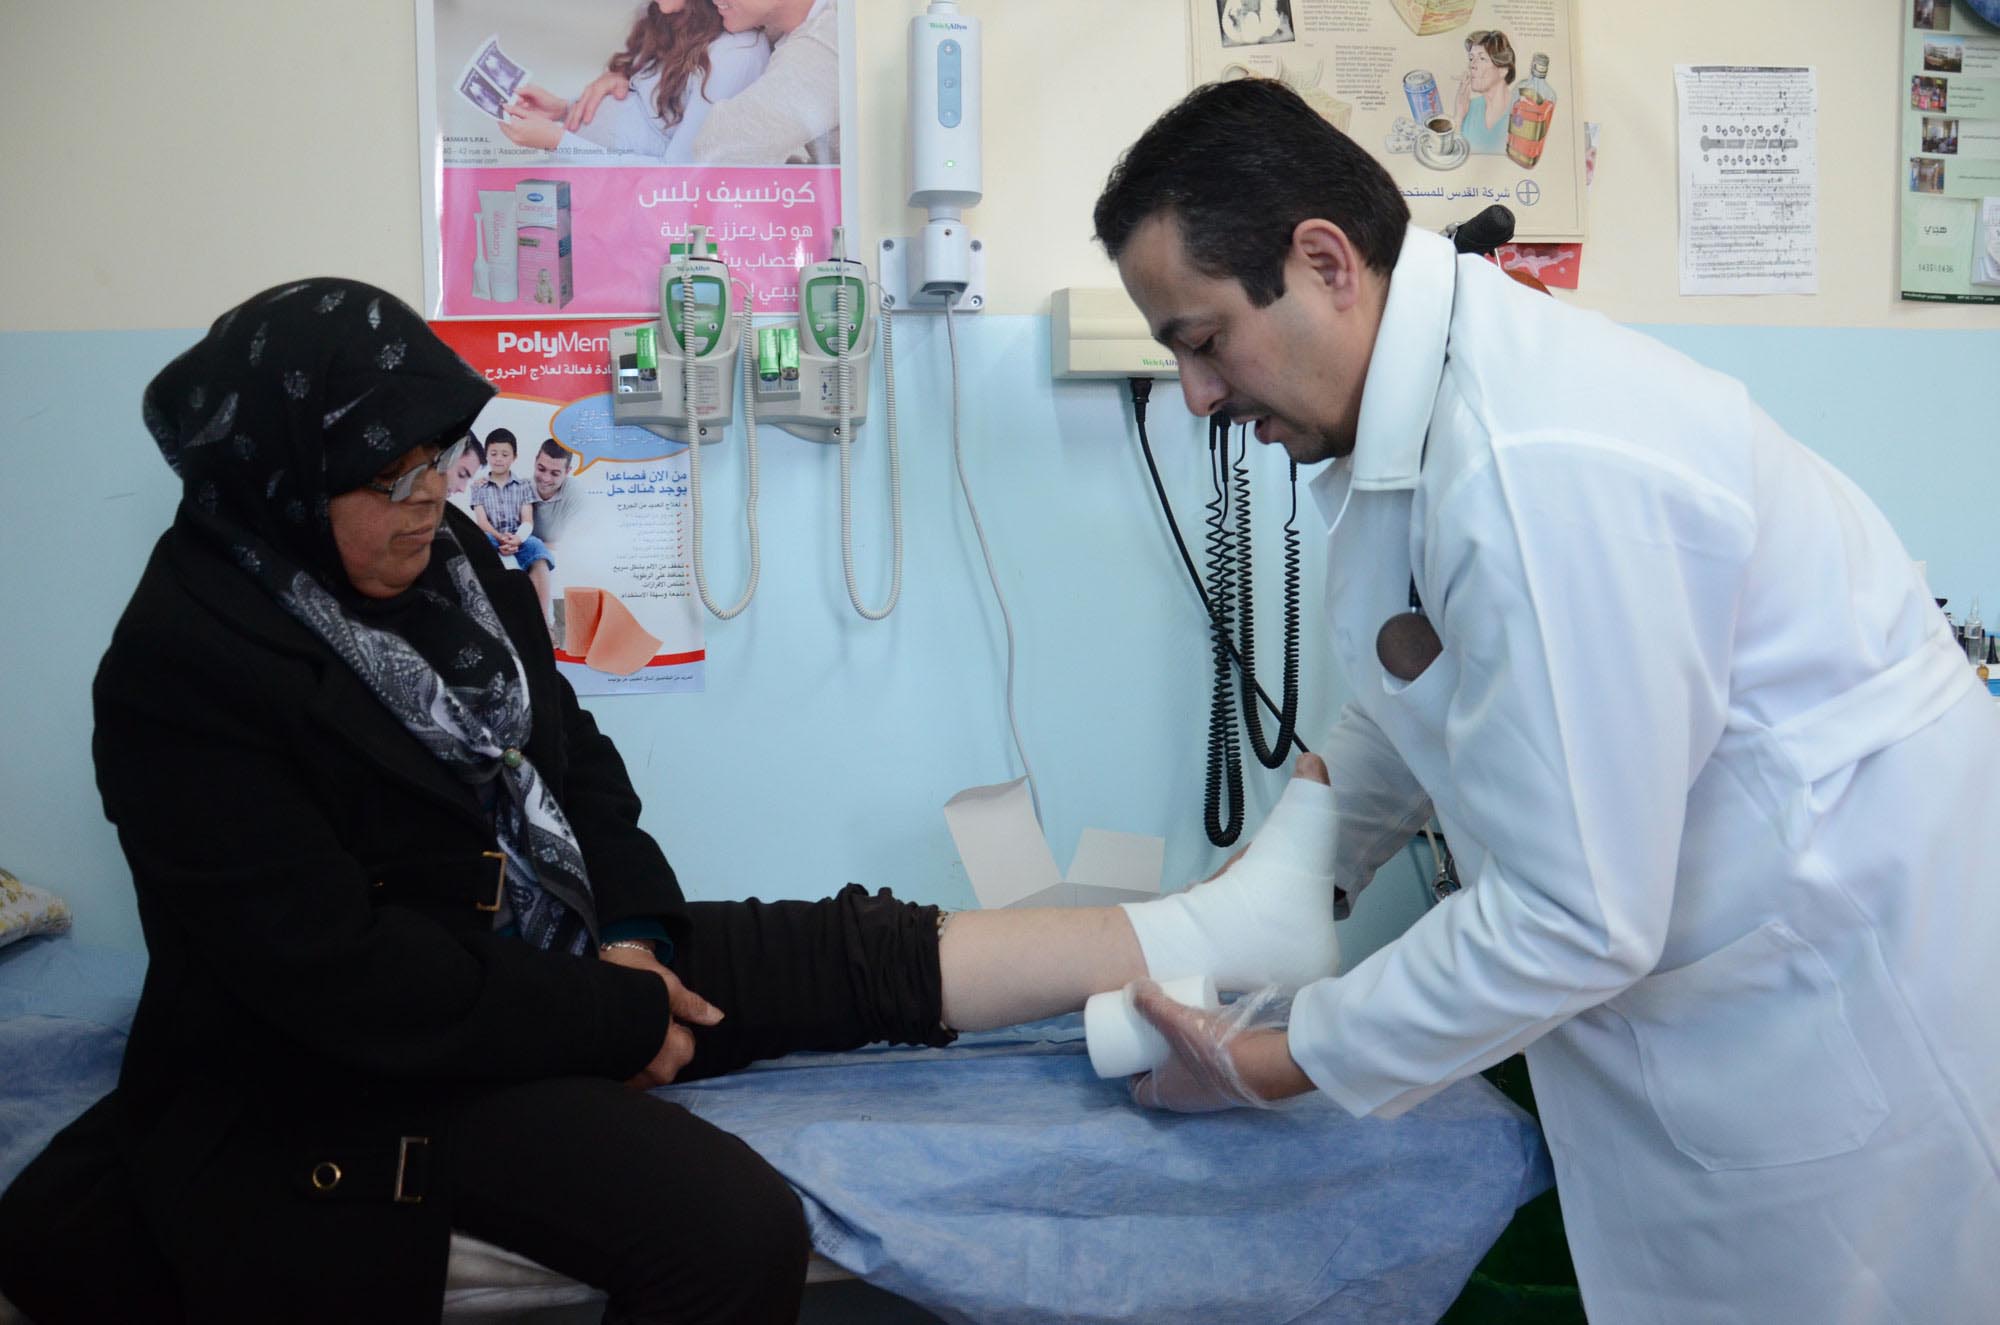 This charitable clinic in Hebron received a medical donation from Anera.